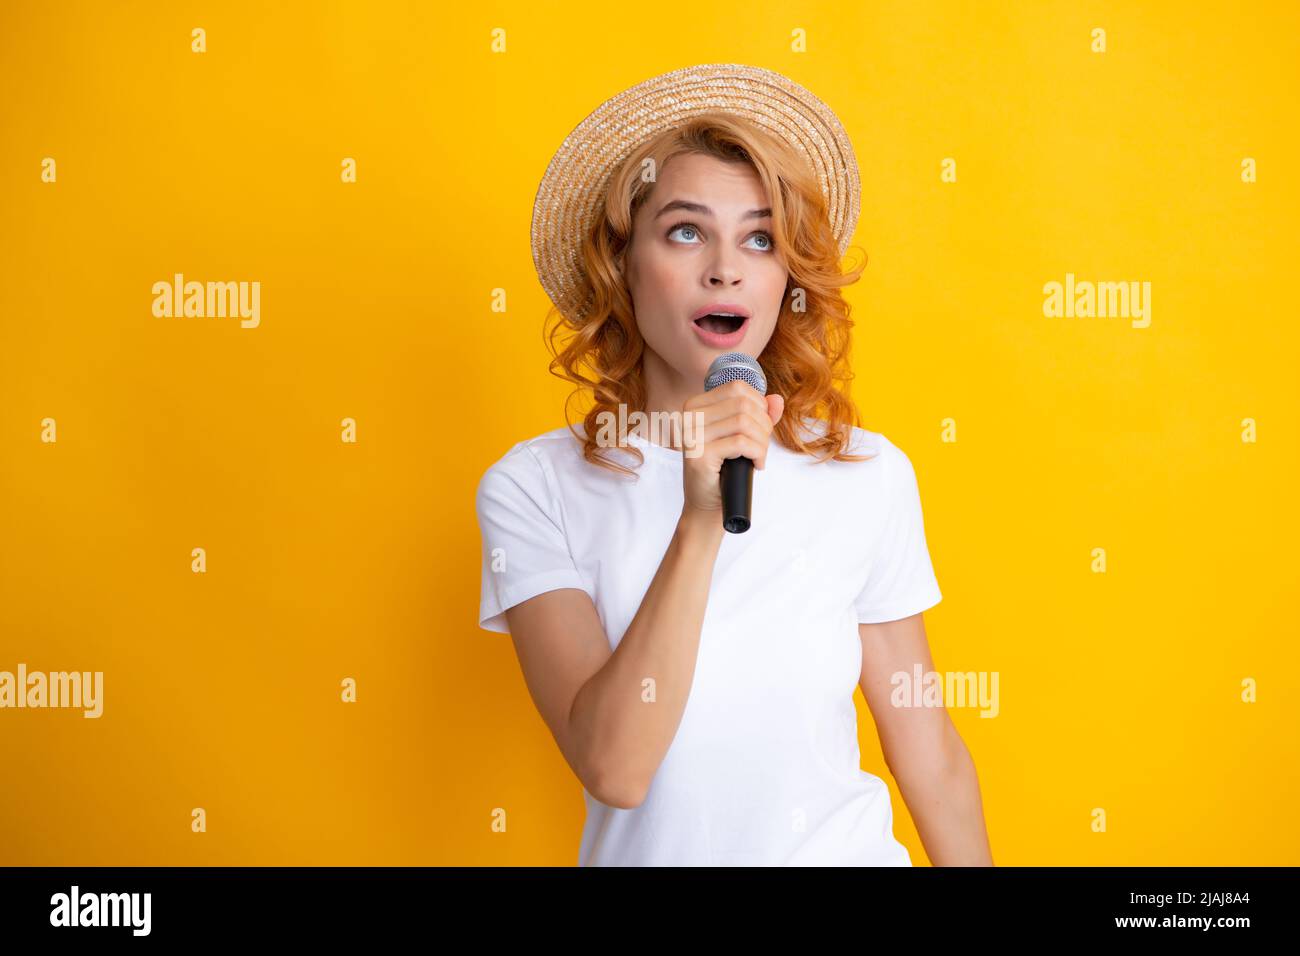 Microphone speech speaking concept. Young beautiful woman singing song using microphone. Stock Photo